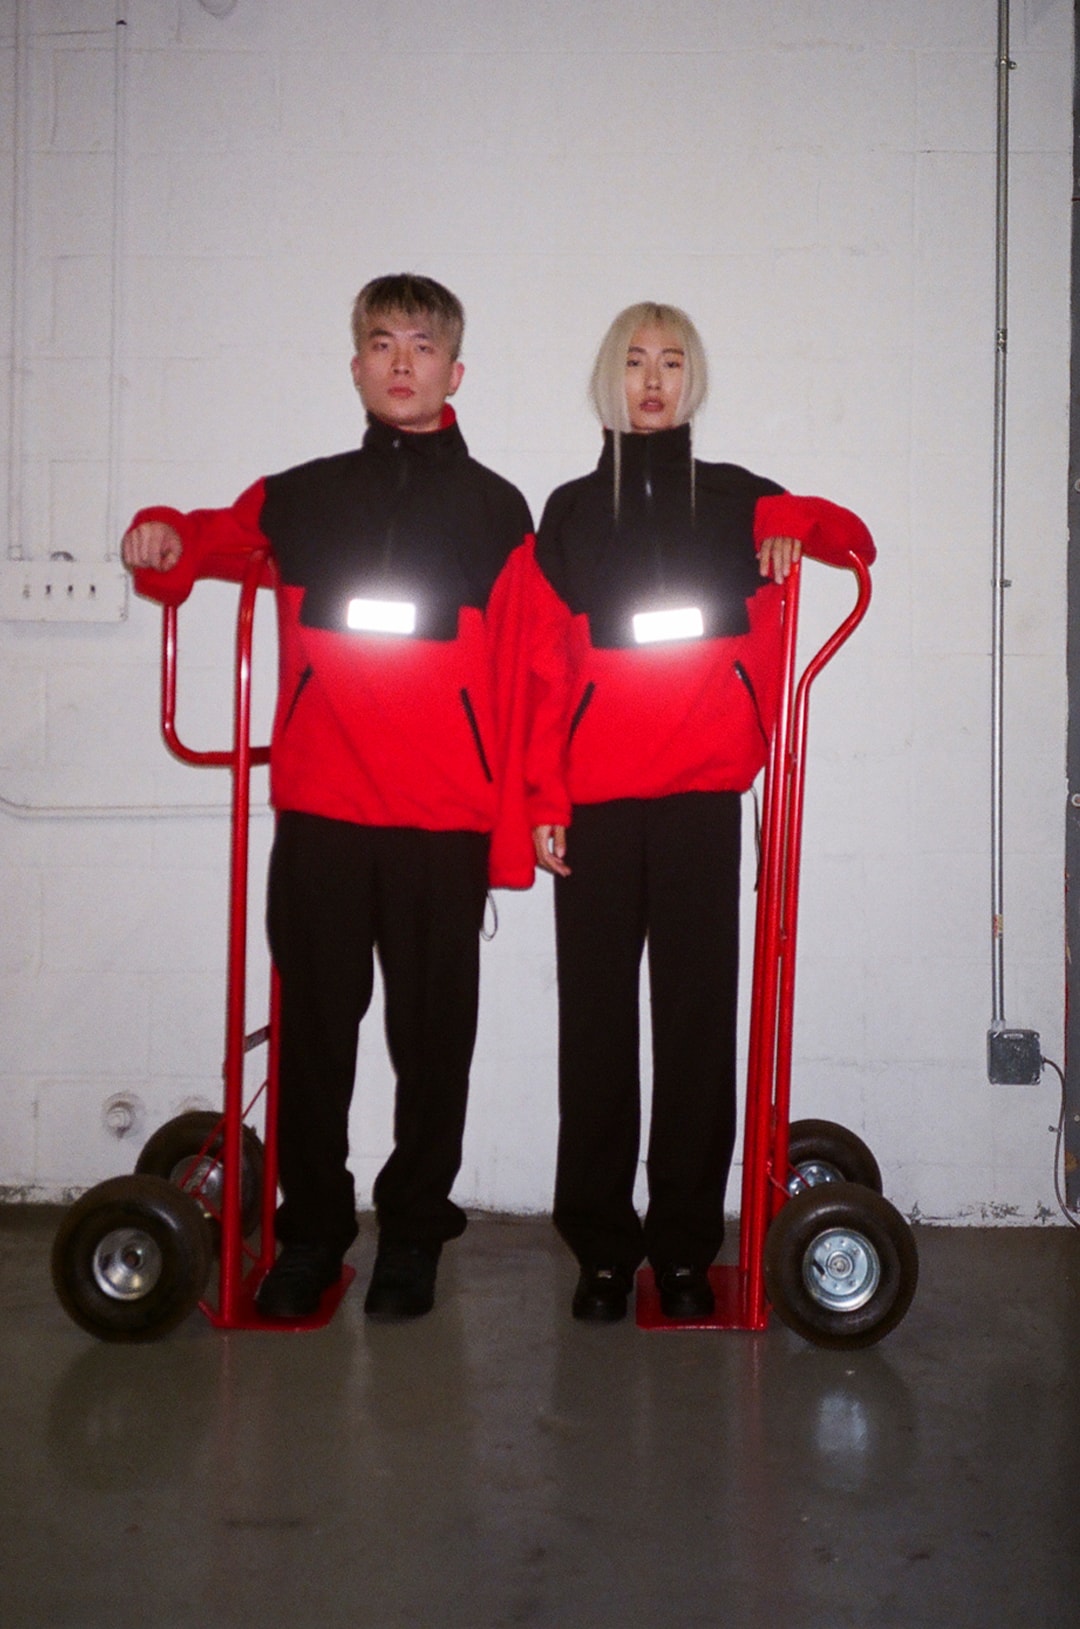 Danielle Guizio Drops First Unisex Capsule Range Collection Fashion Streetwear Where to Buy 